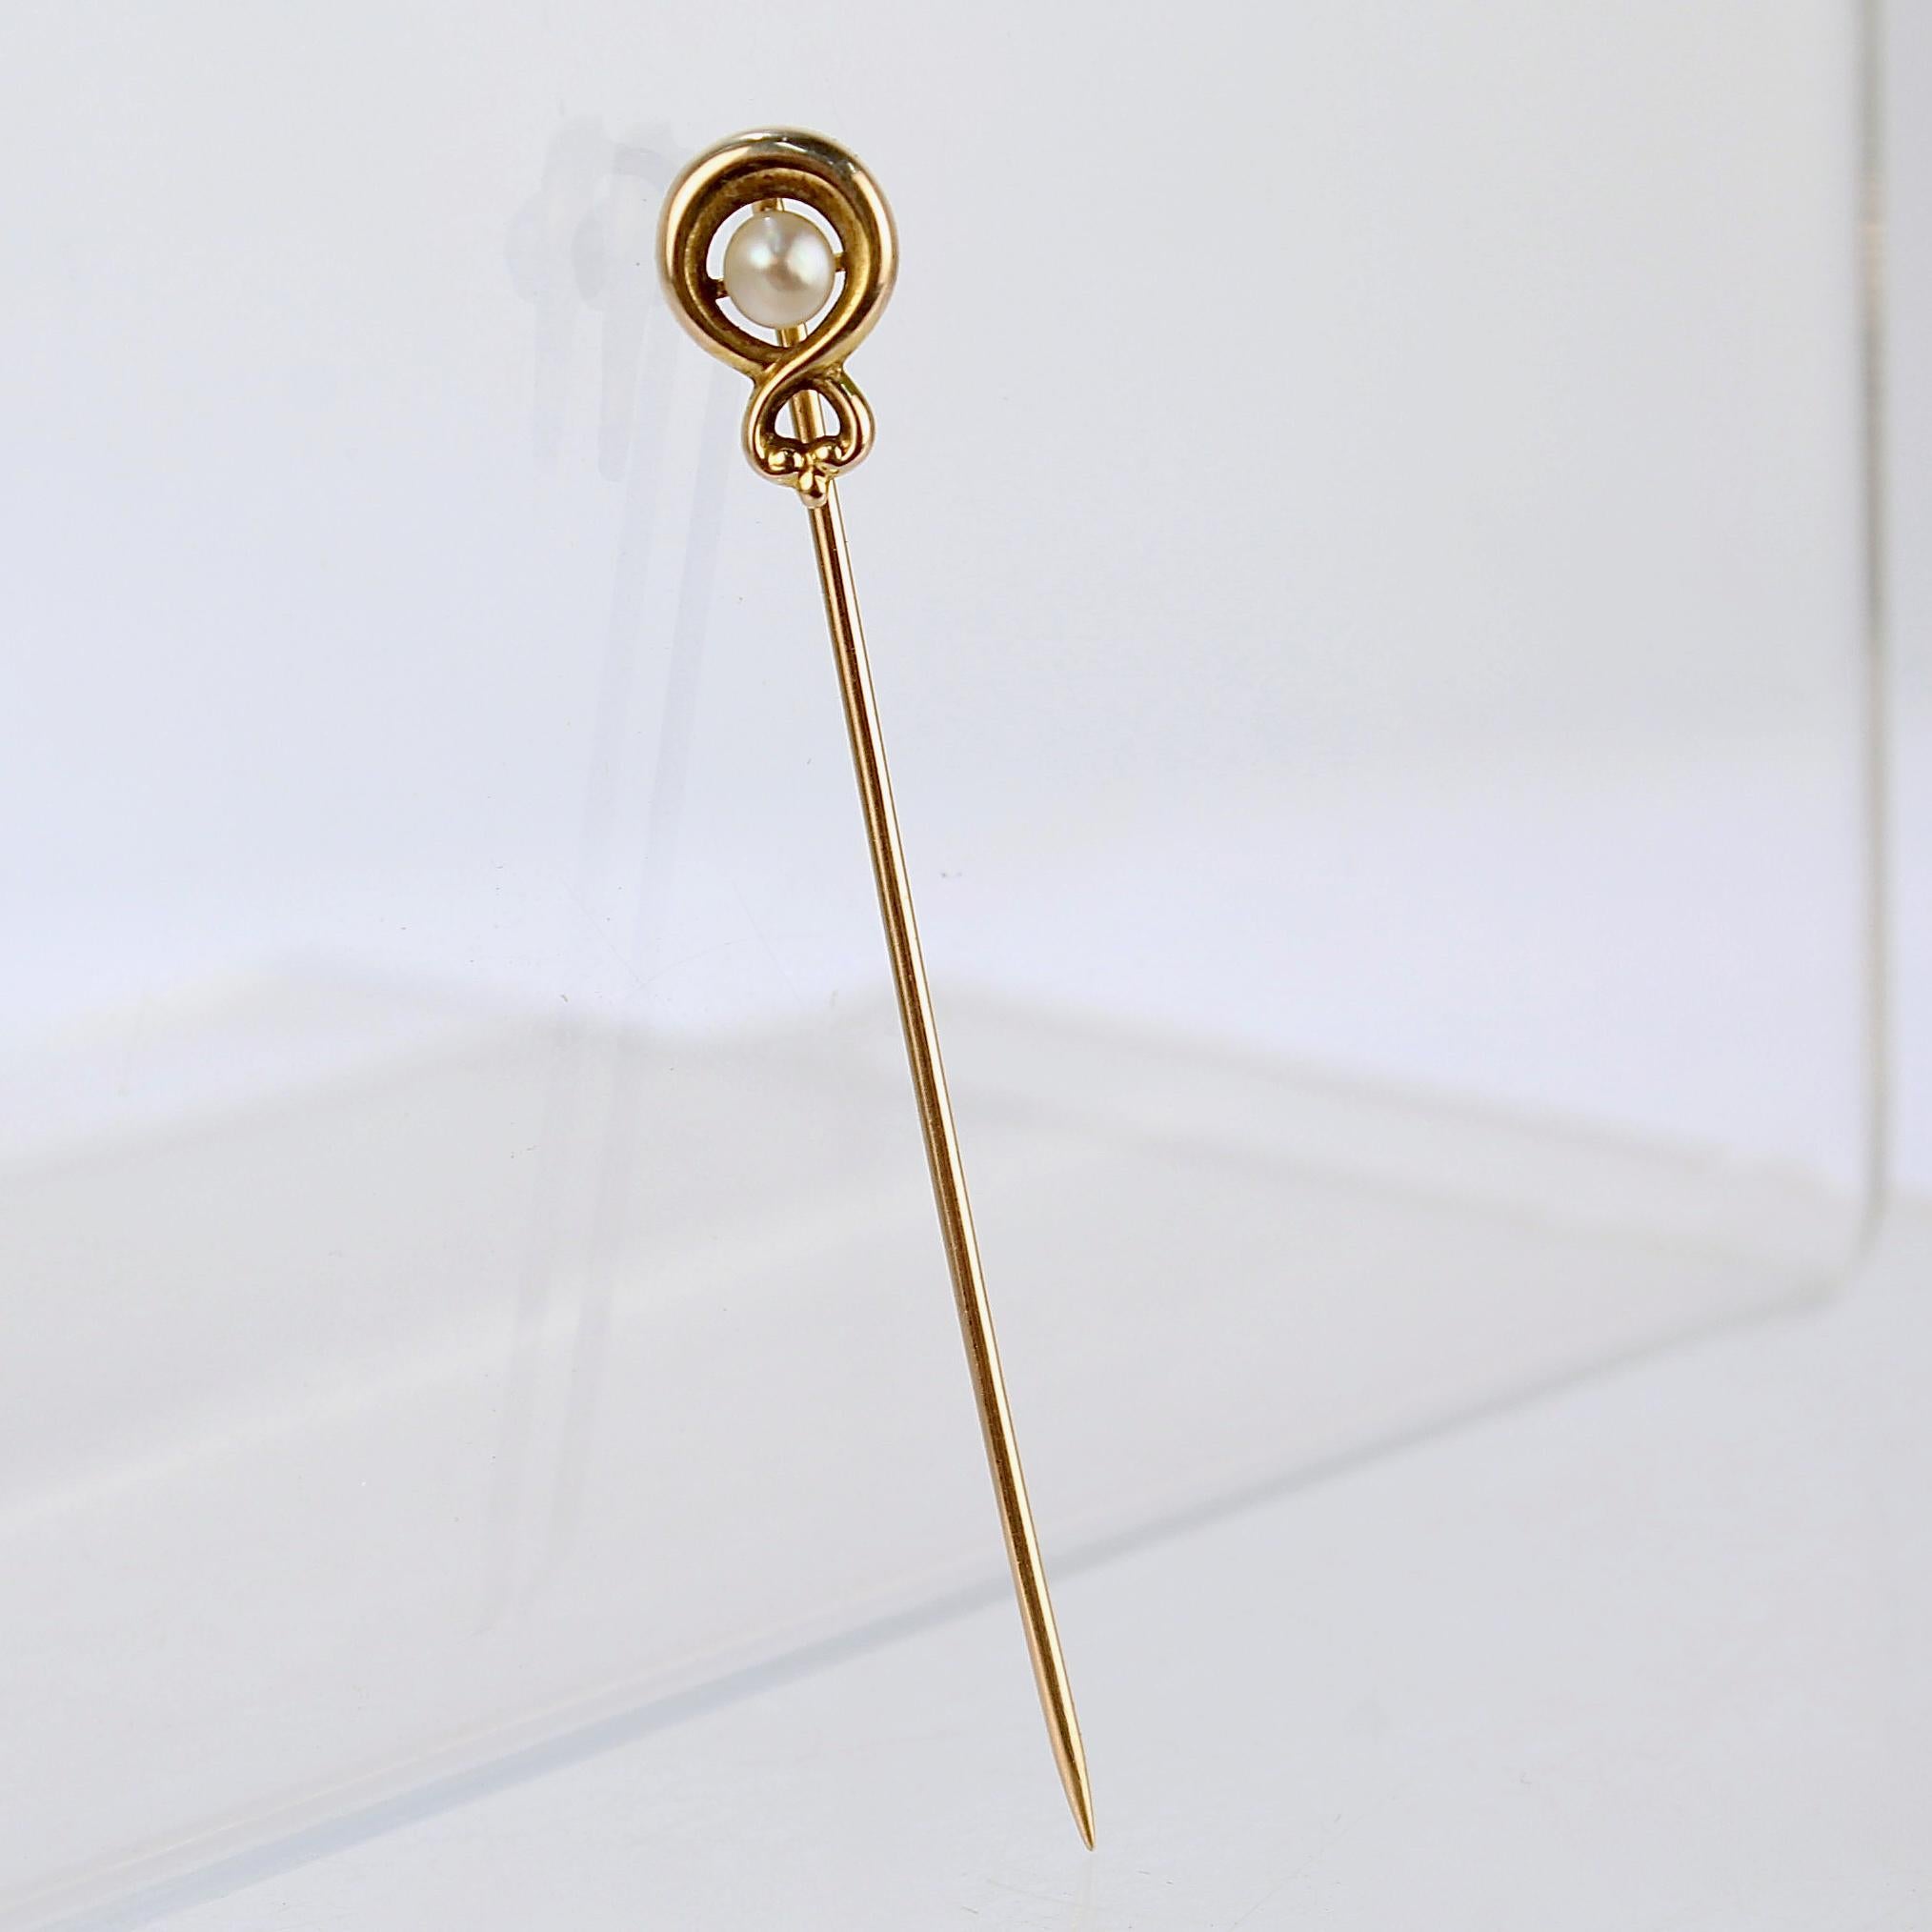 A very fine 10k gold and seed pearl stickpin.

With a round white pearl set in center of a 10k gold infinity loop.

Simply a great stickpin! 

Date:
Early 20th Century

Overall Condition:
It is in overall good, as-pictured, used estate